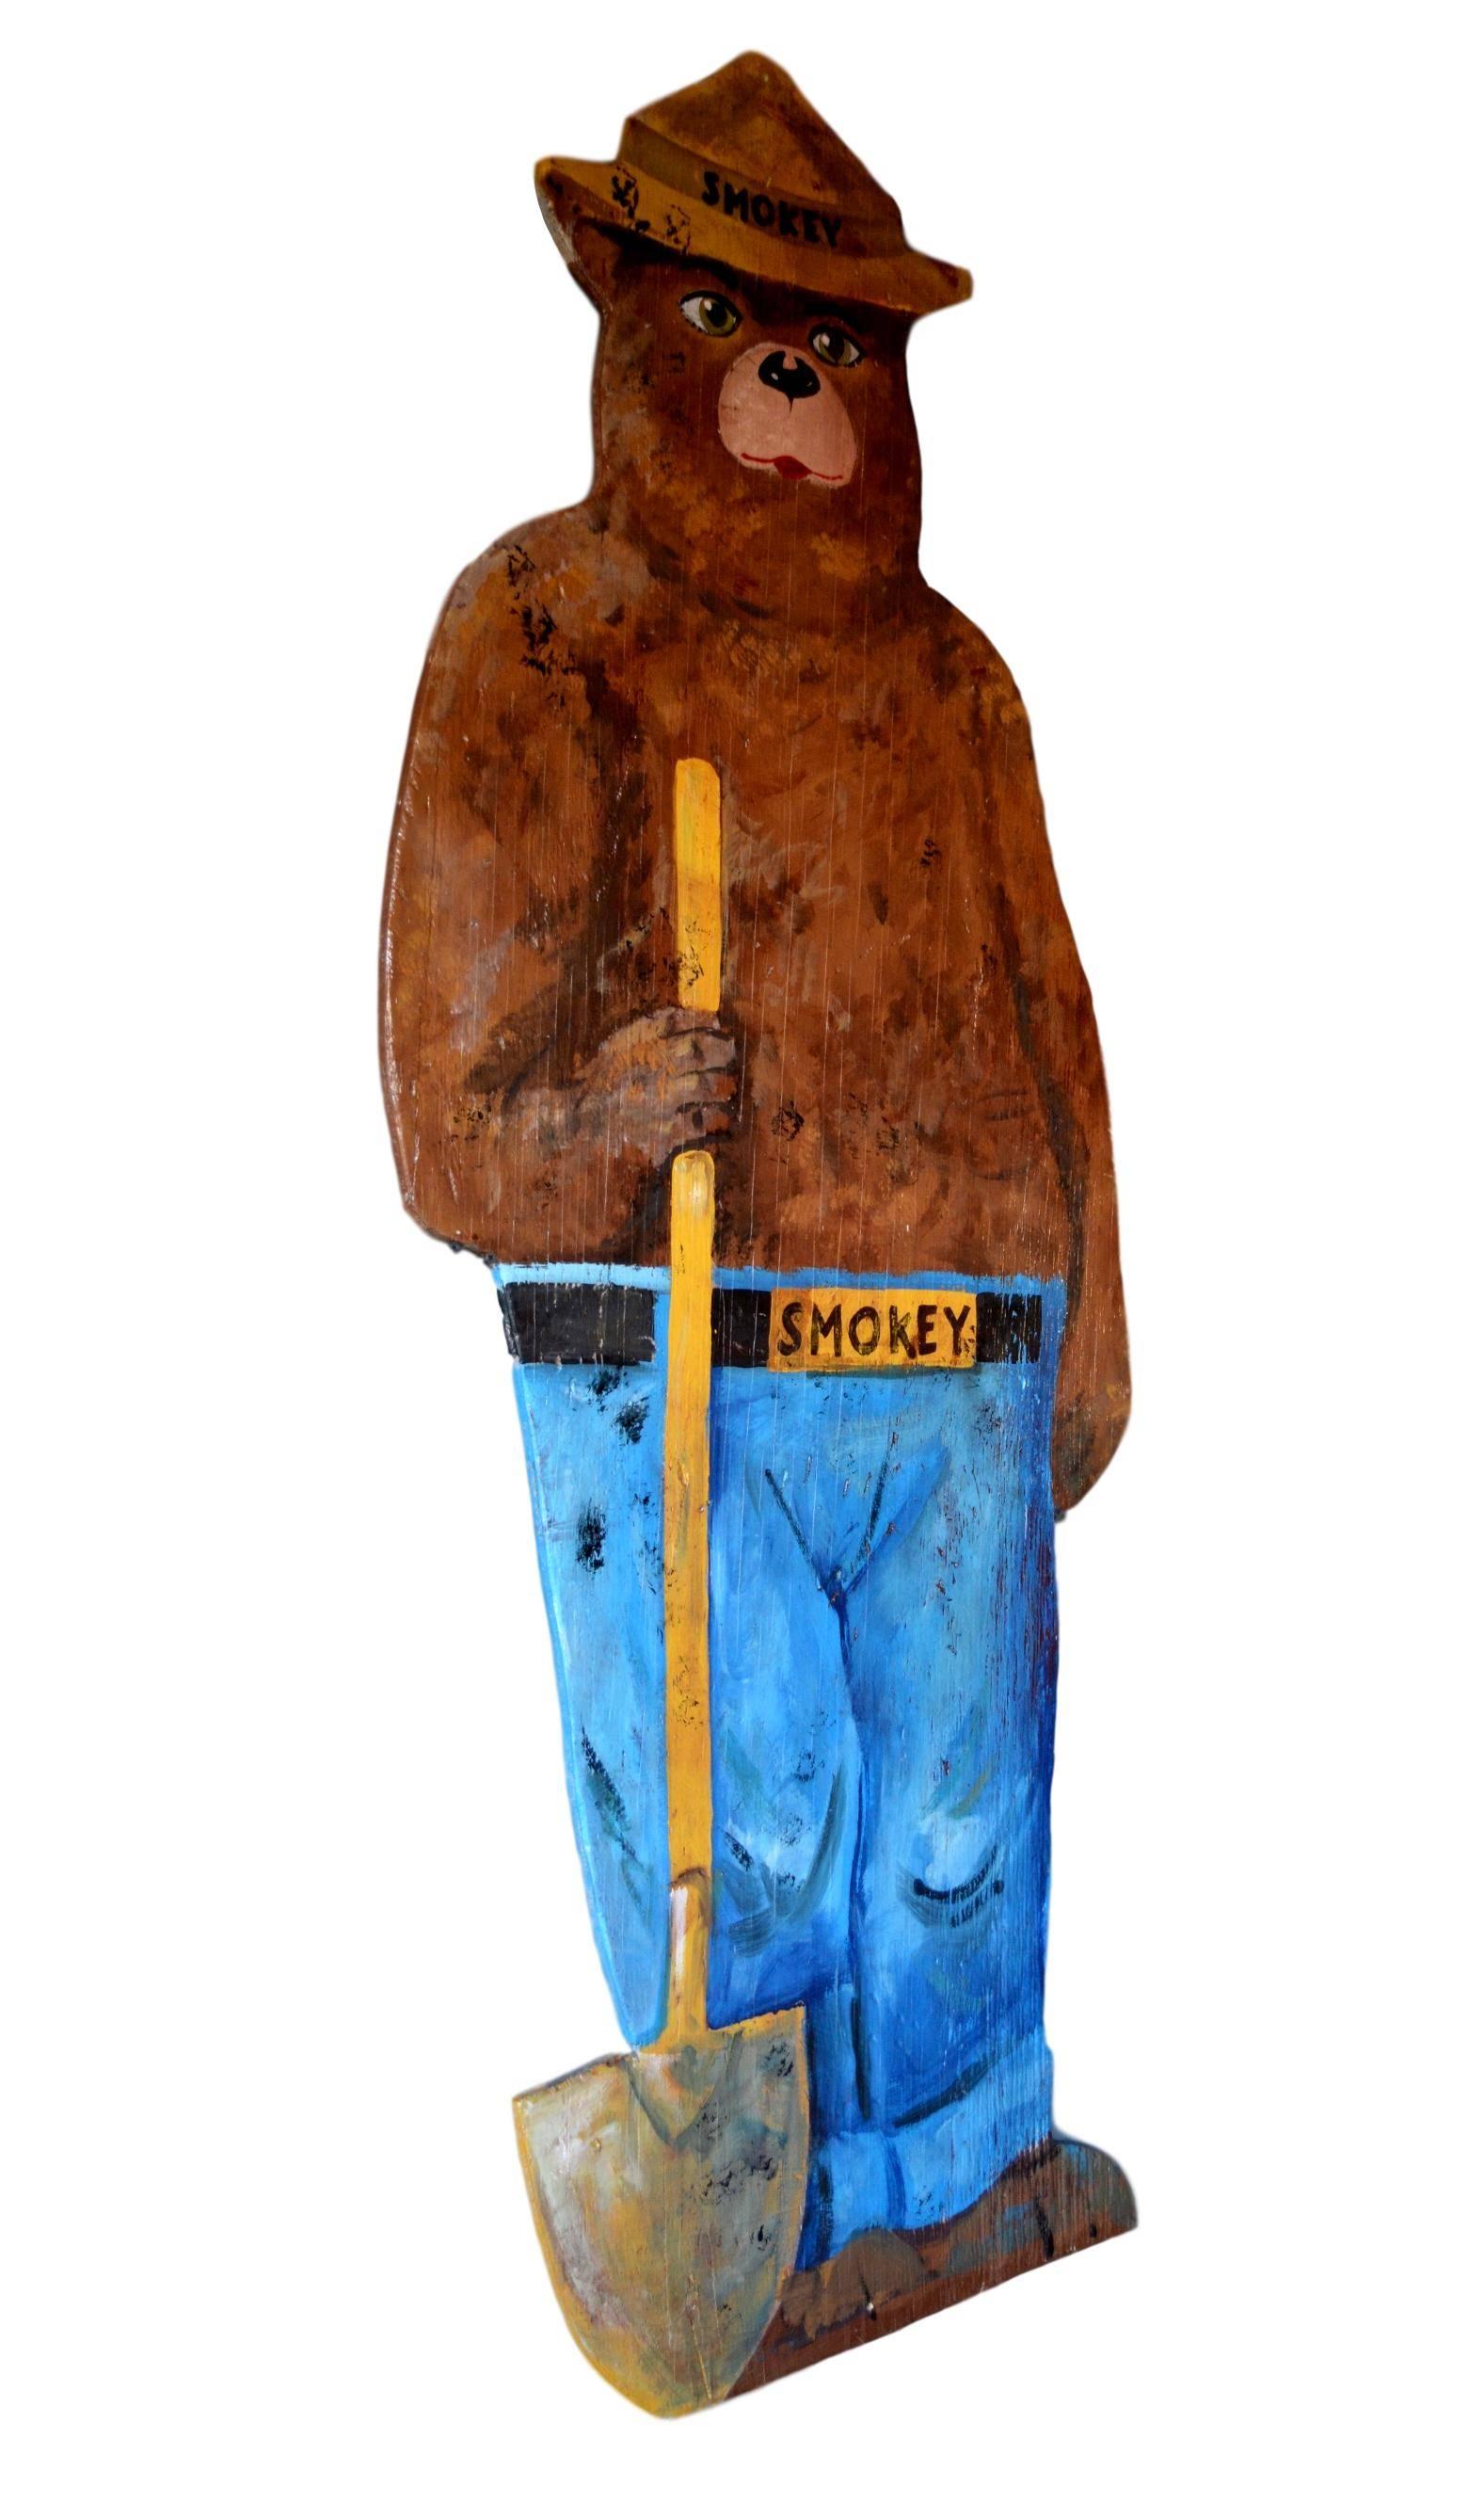 American Hand-Painted Wooden Life-Sized Smokey the Bear